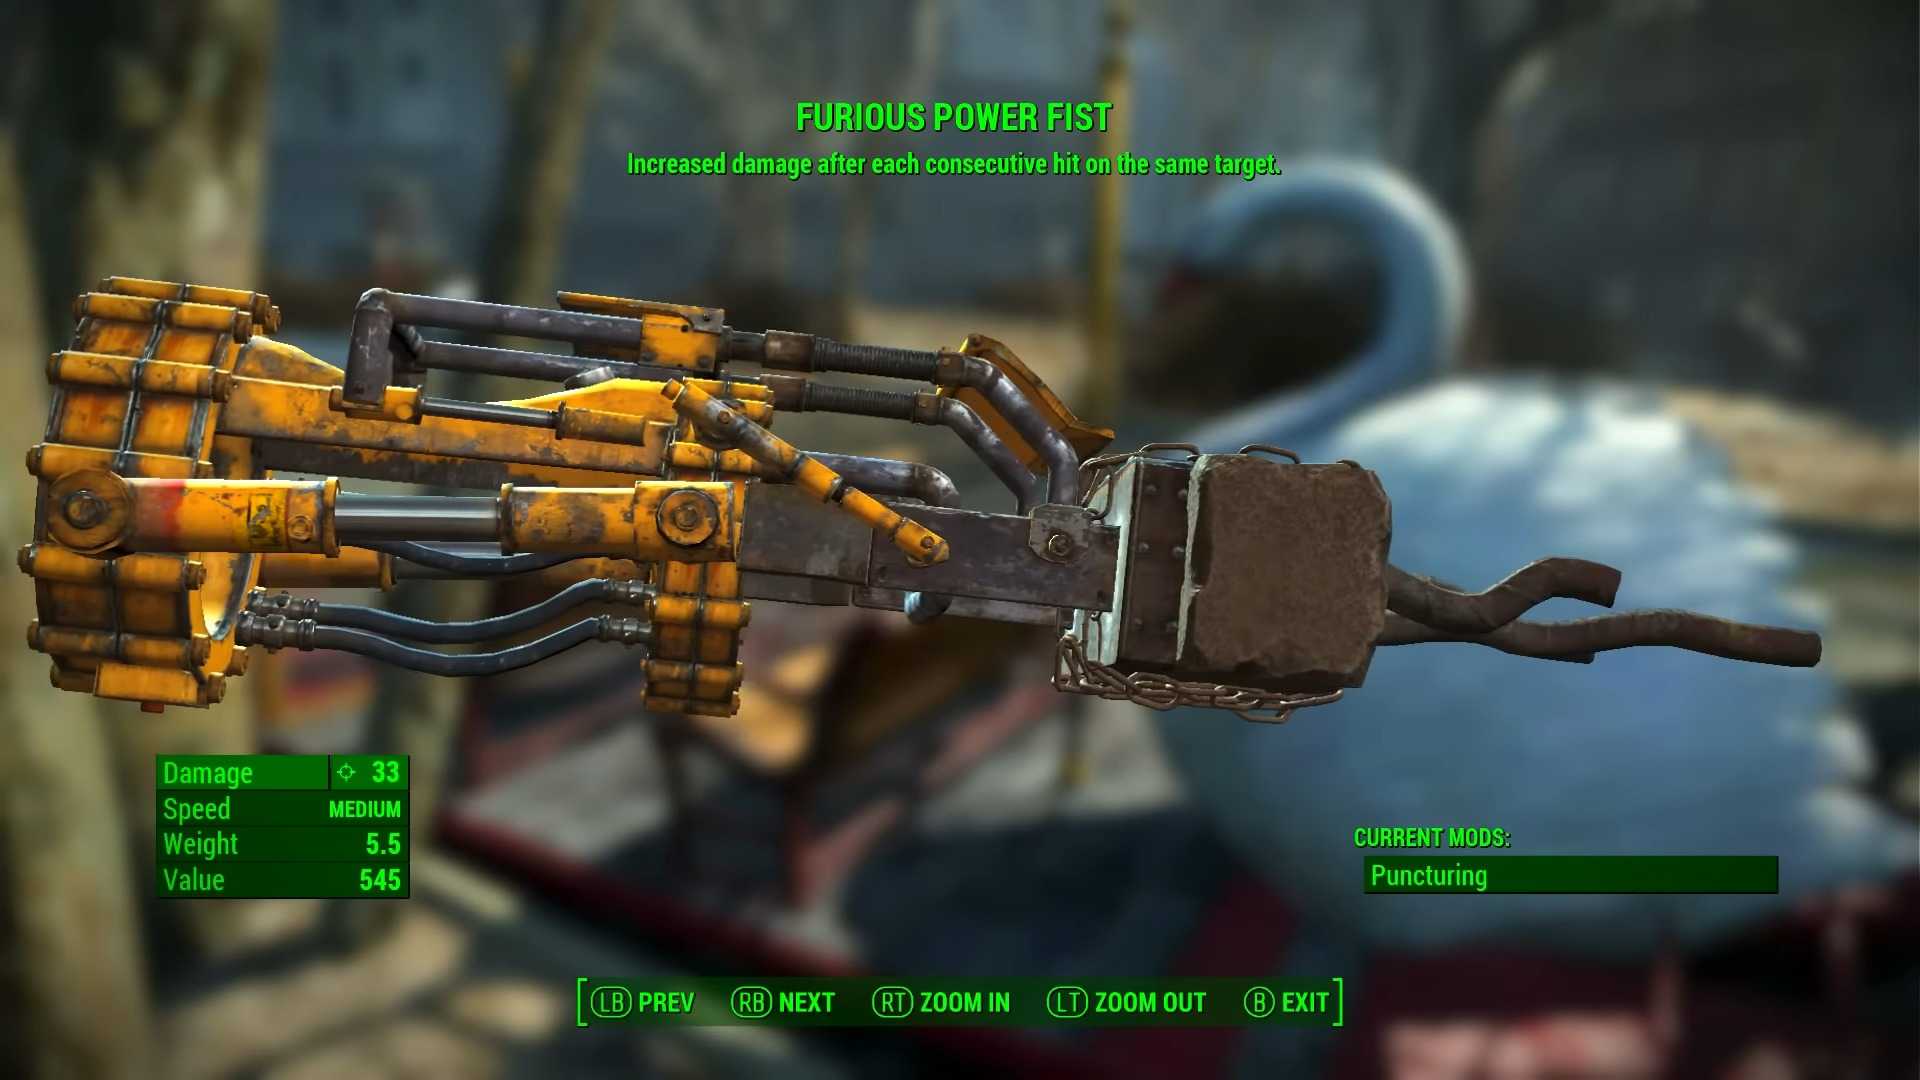 Furious Power Fist in Fallout 4